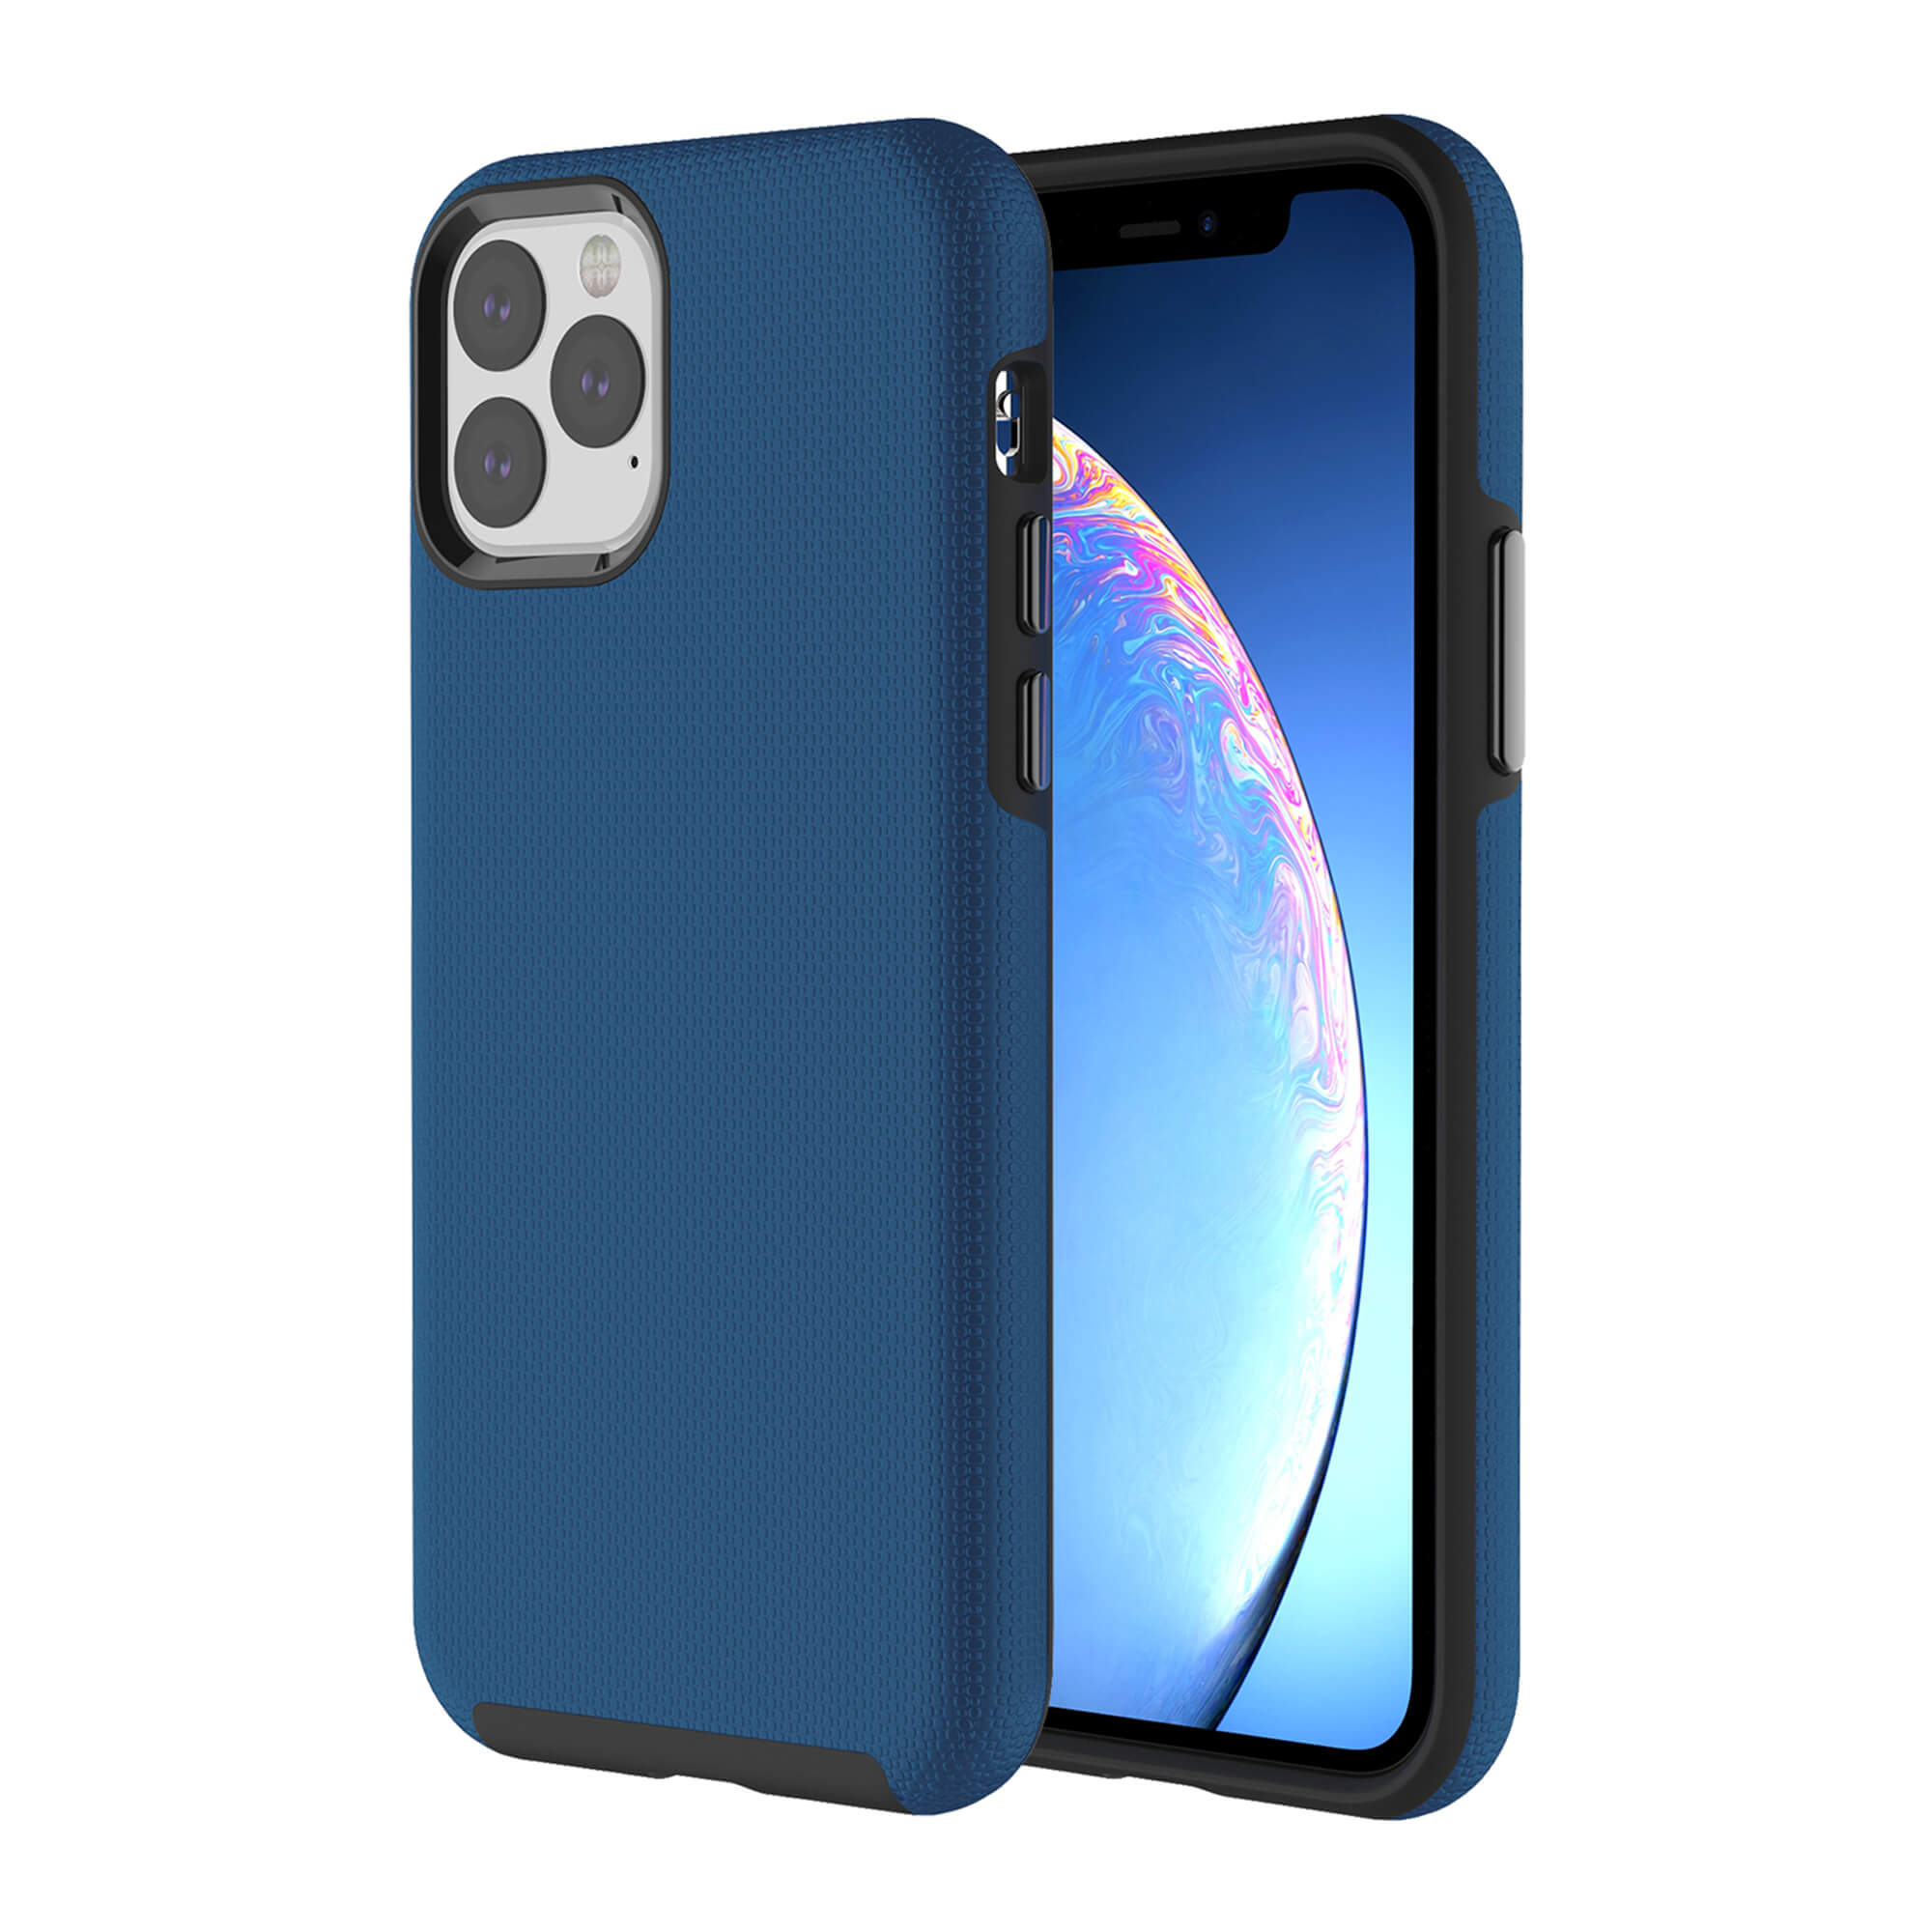 Axessorize PROTech case for iPhone 11 Pro Max - Cobalt Blue